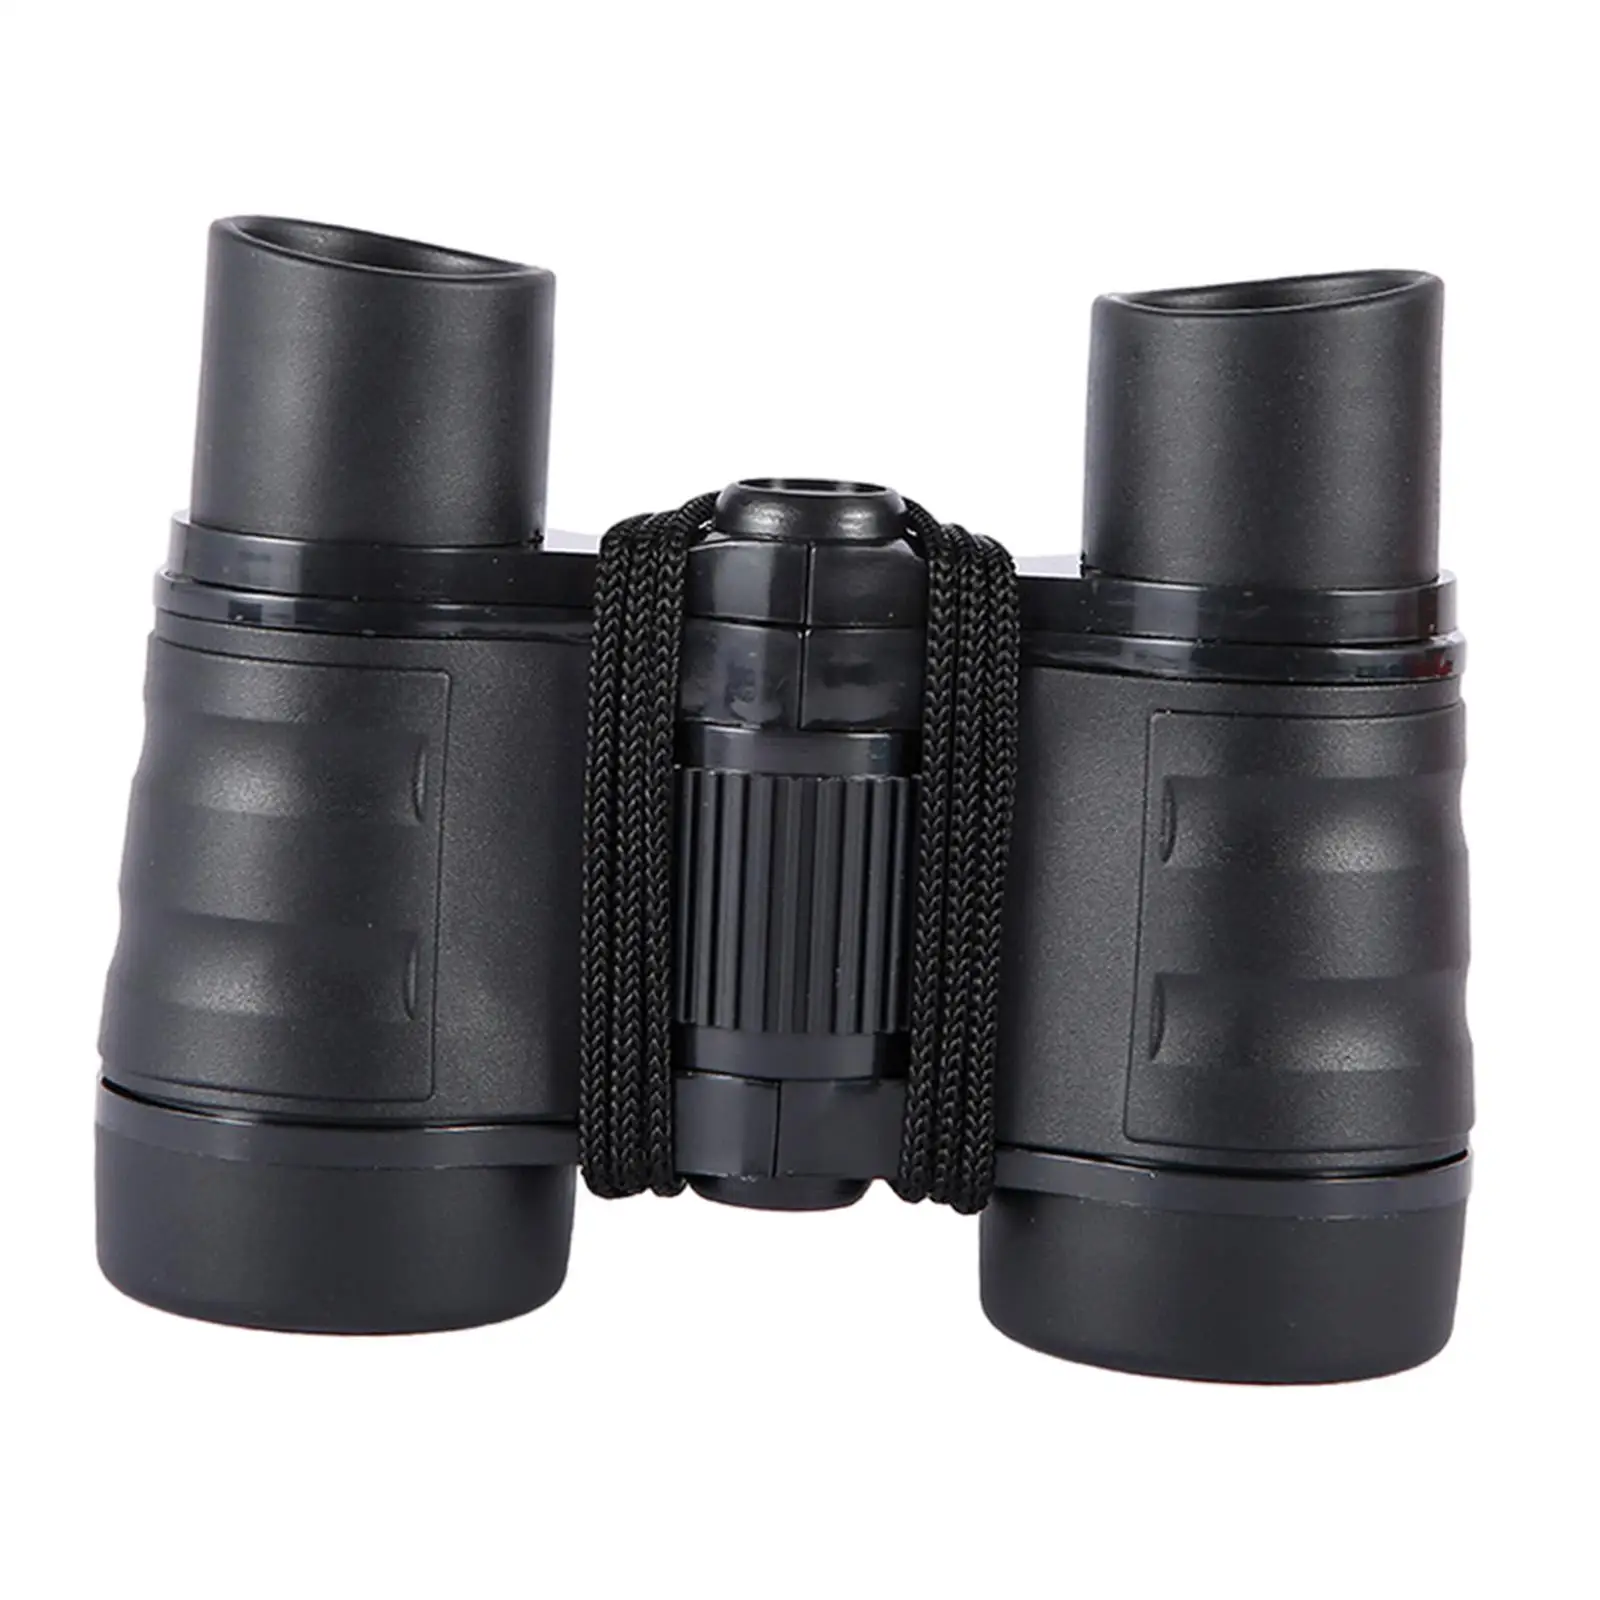 Kids Binoculars Toy 4x30 Bird Watching Telescope Jungle Binoculars Toy for Hunting Camping Presents Science Party Favors